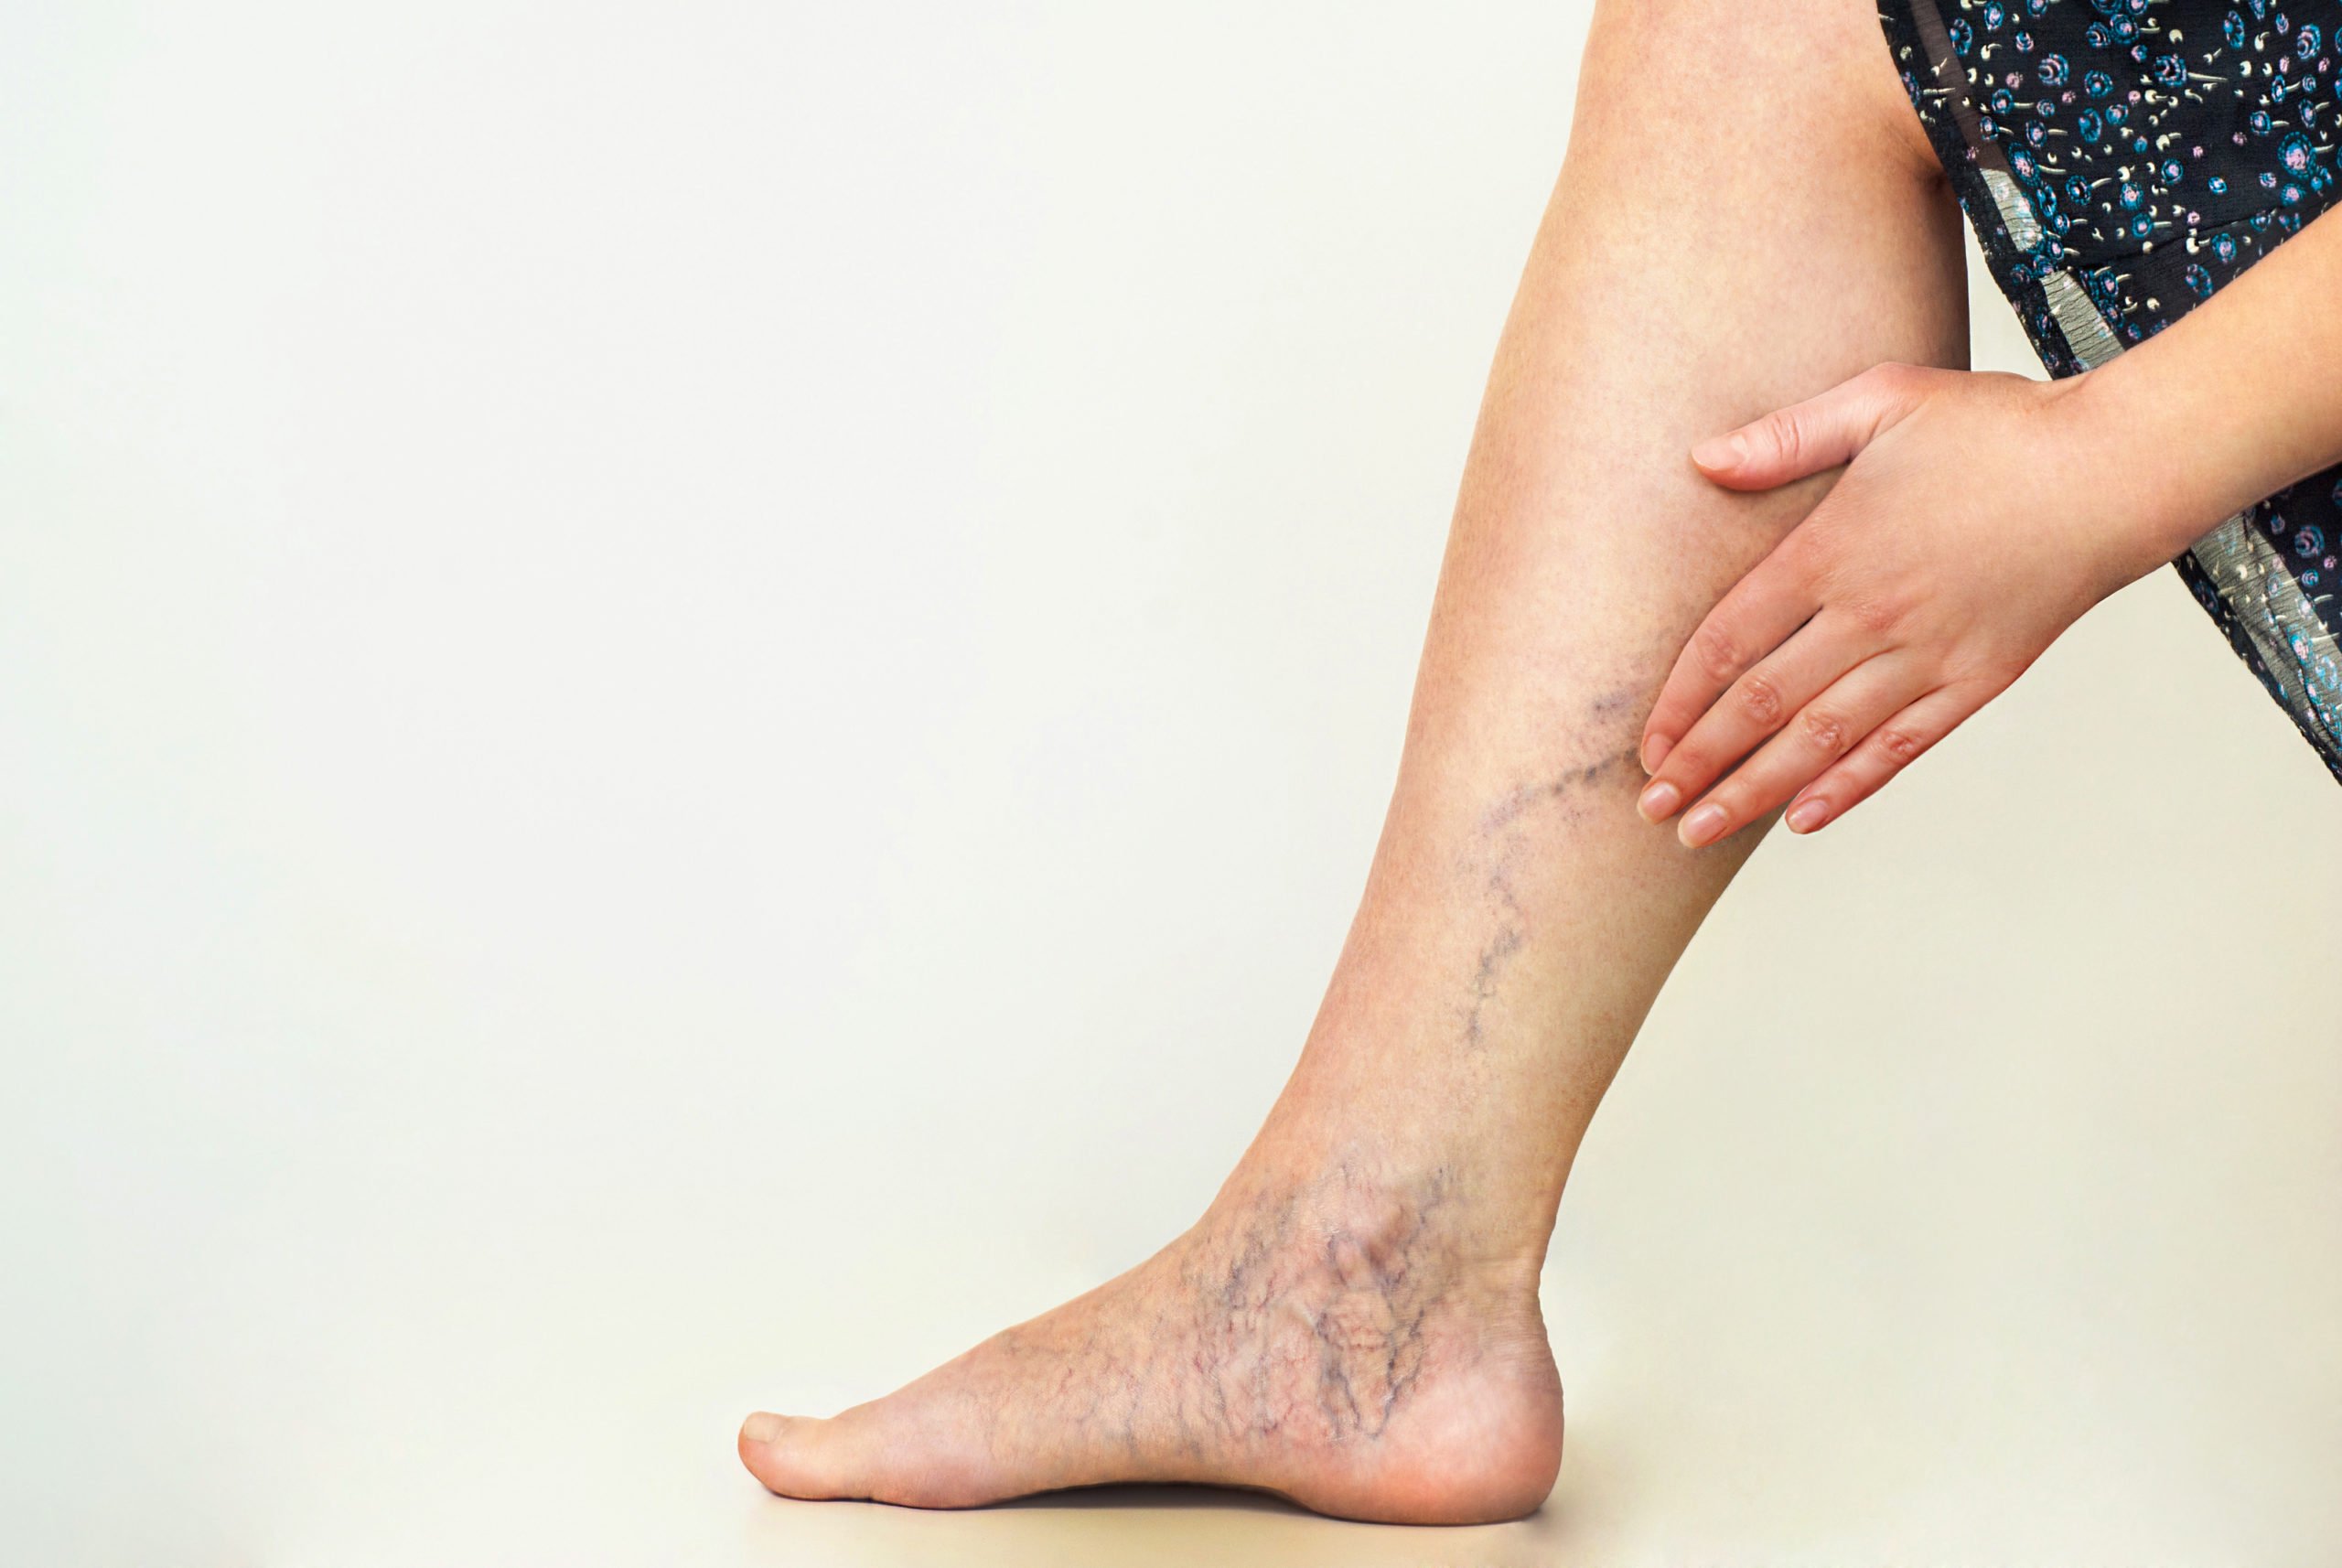 What Causes Varicose or Spider Veins?